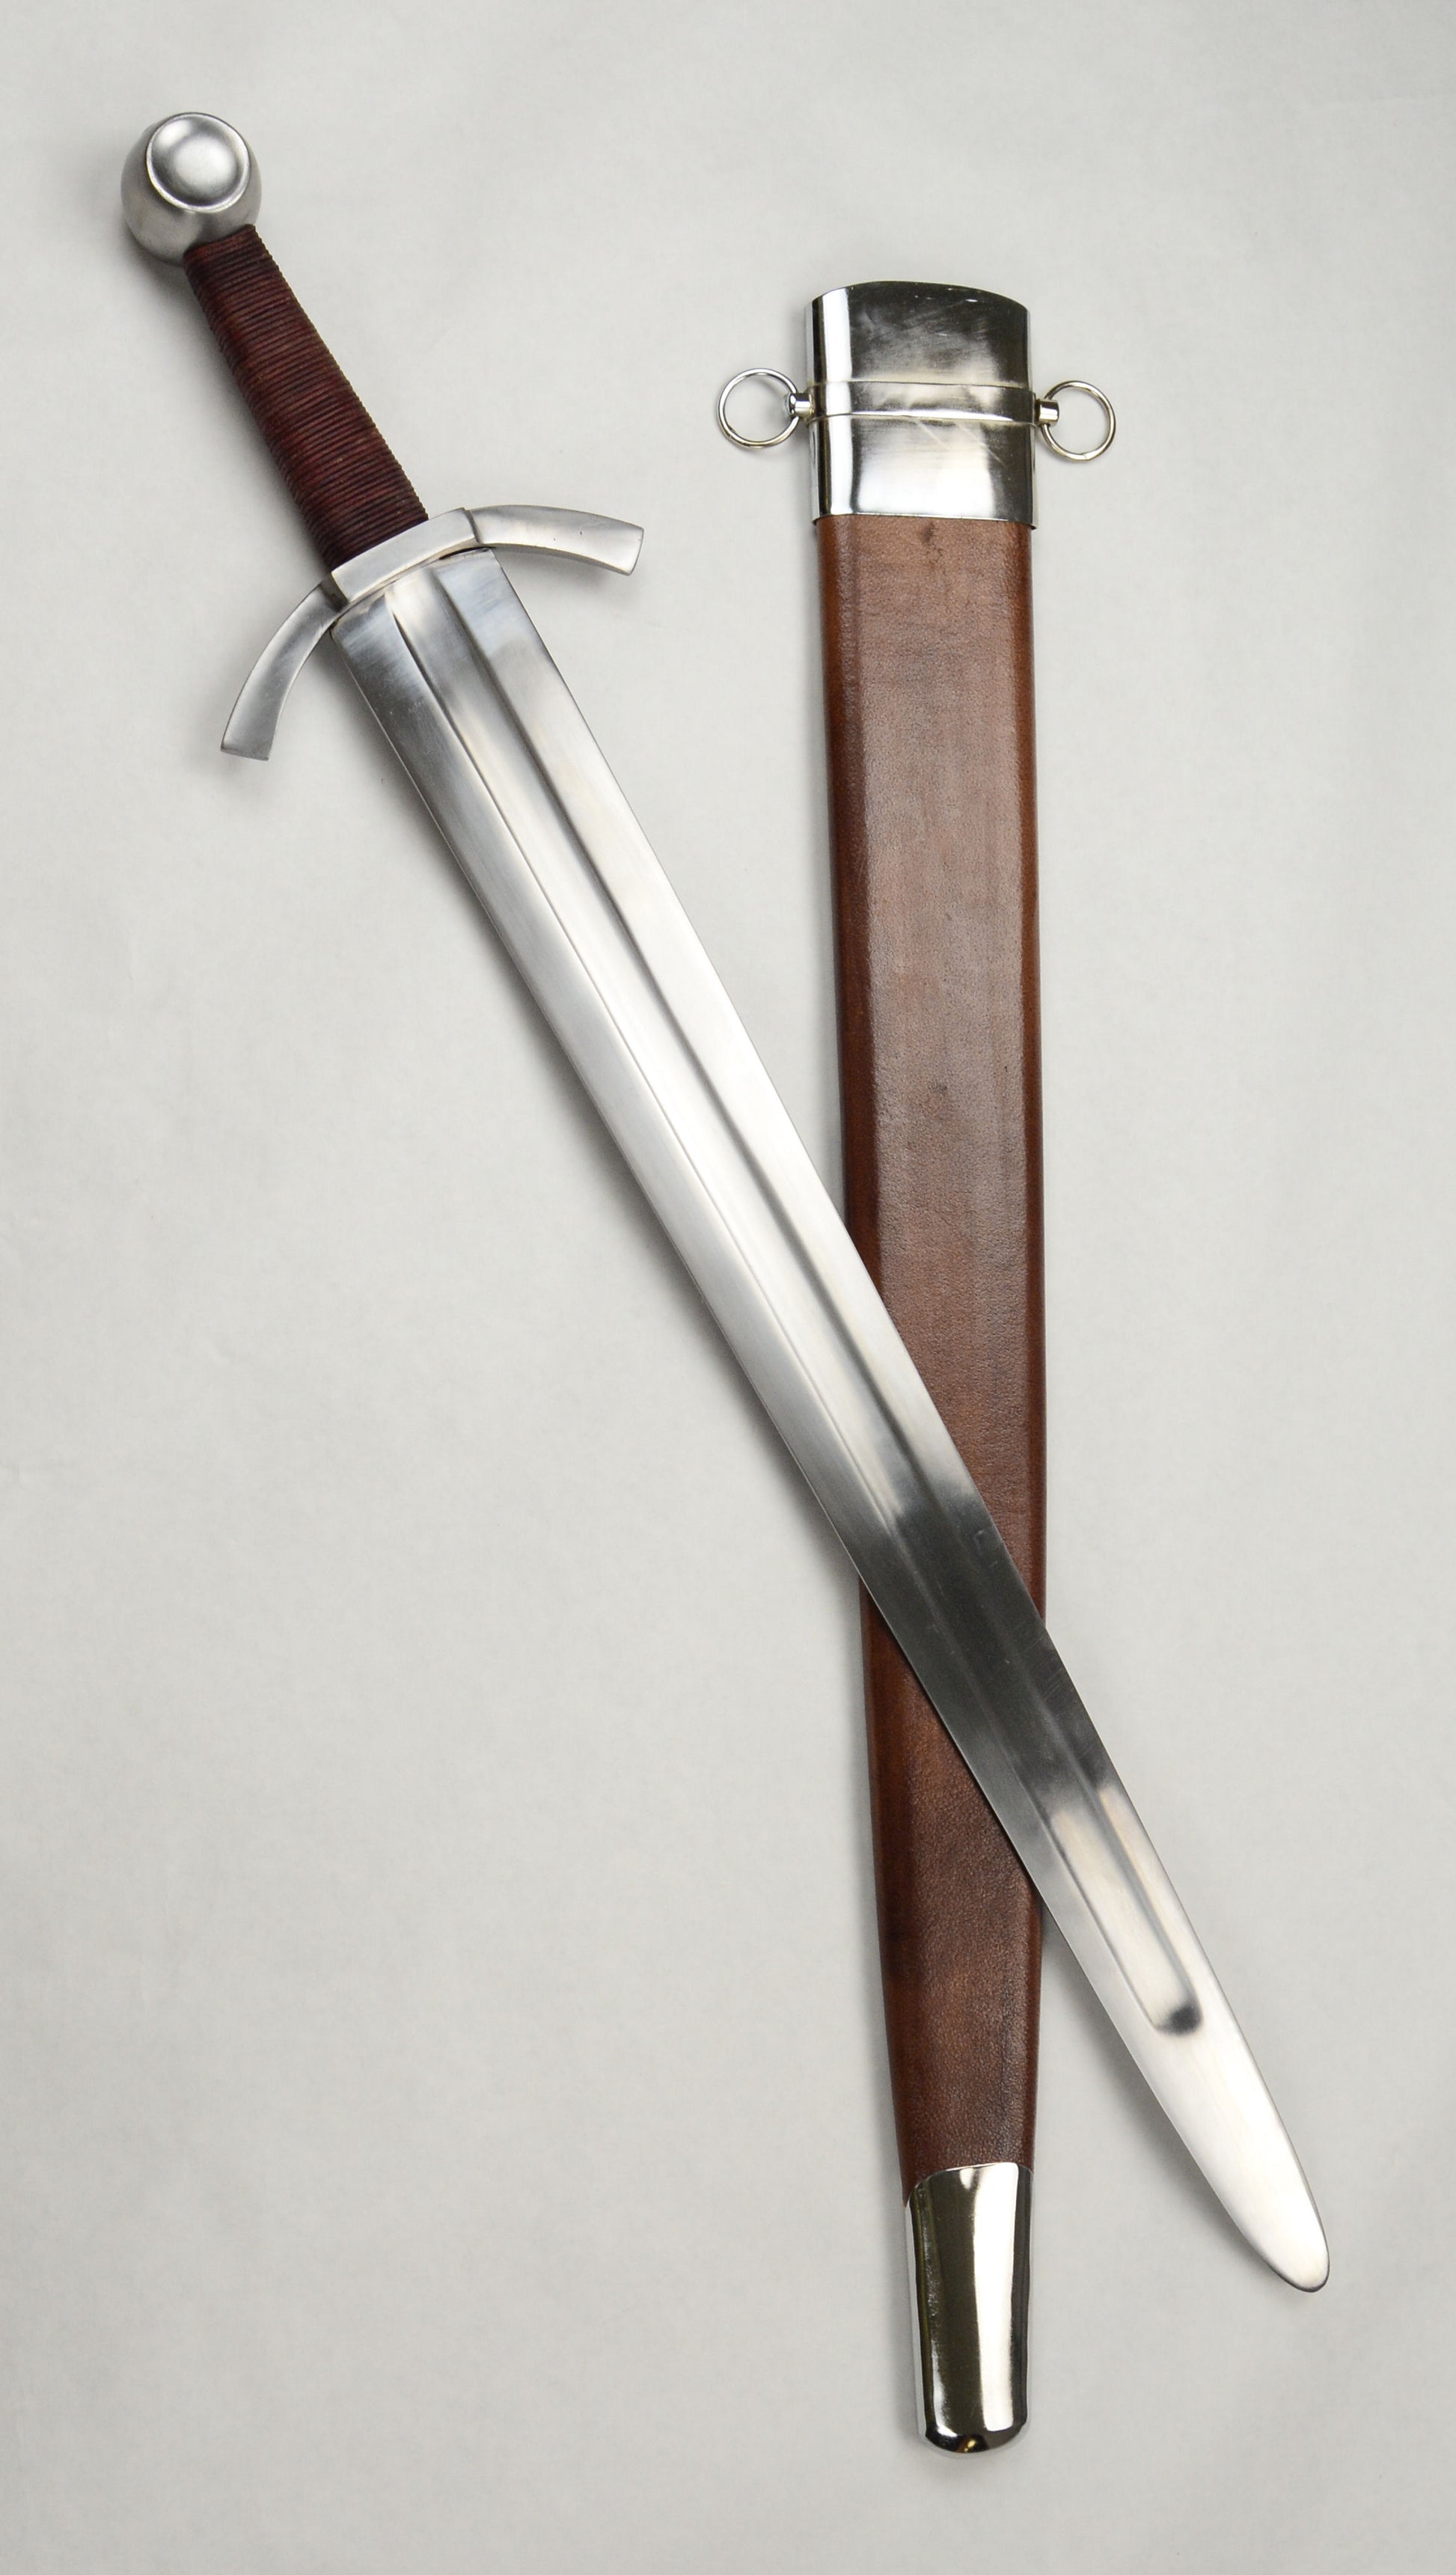 Late Medieval Arming Sword - Stage Combat Version